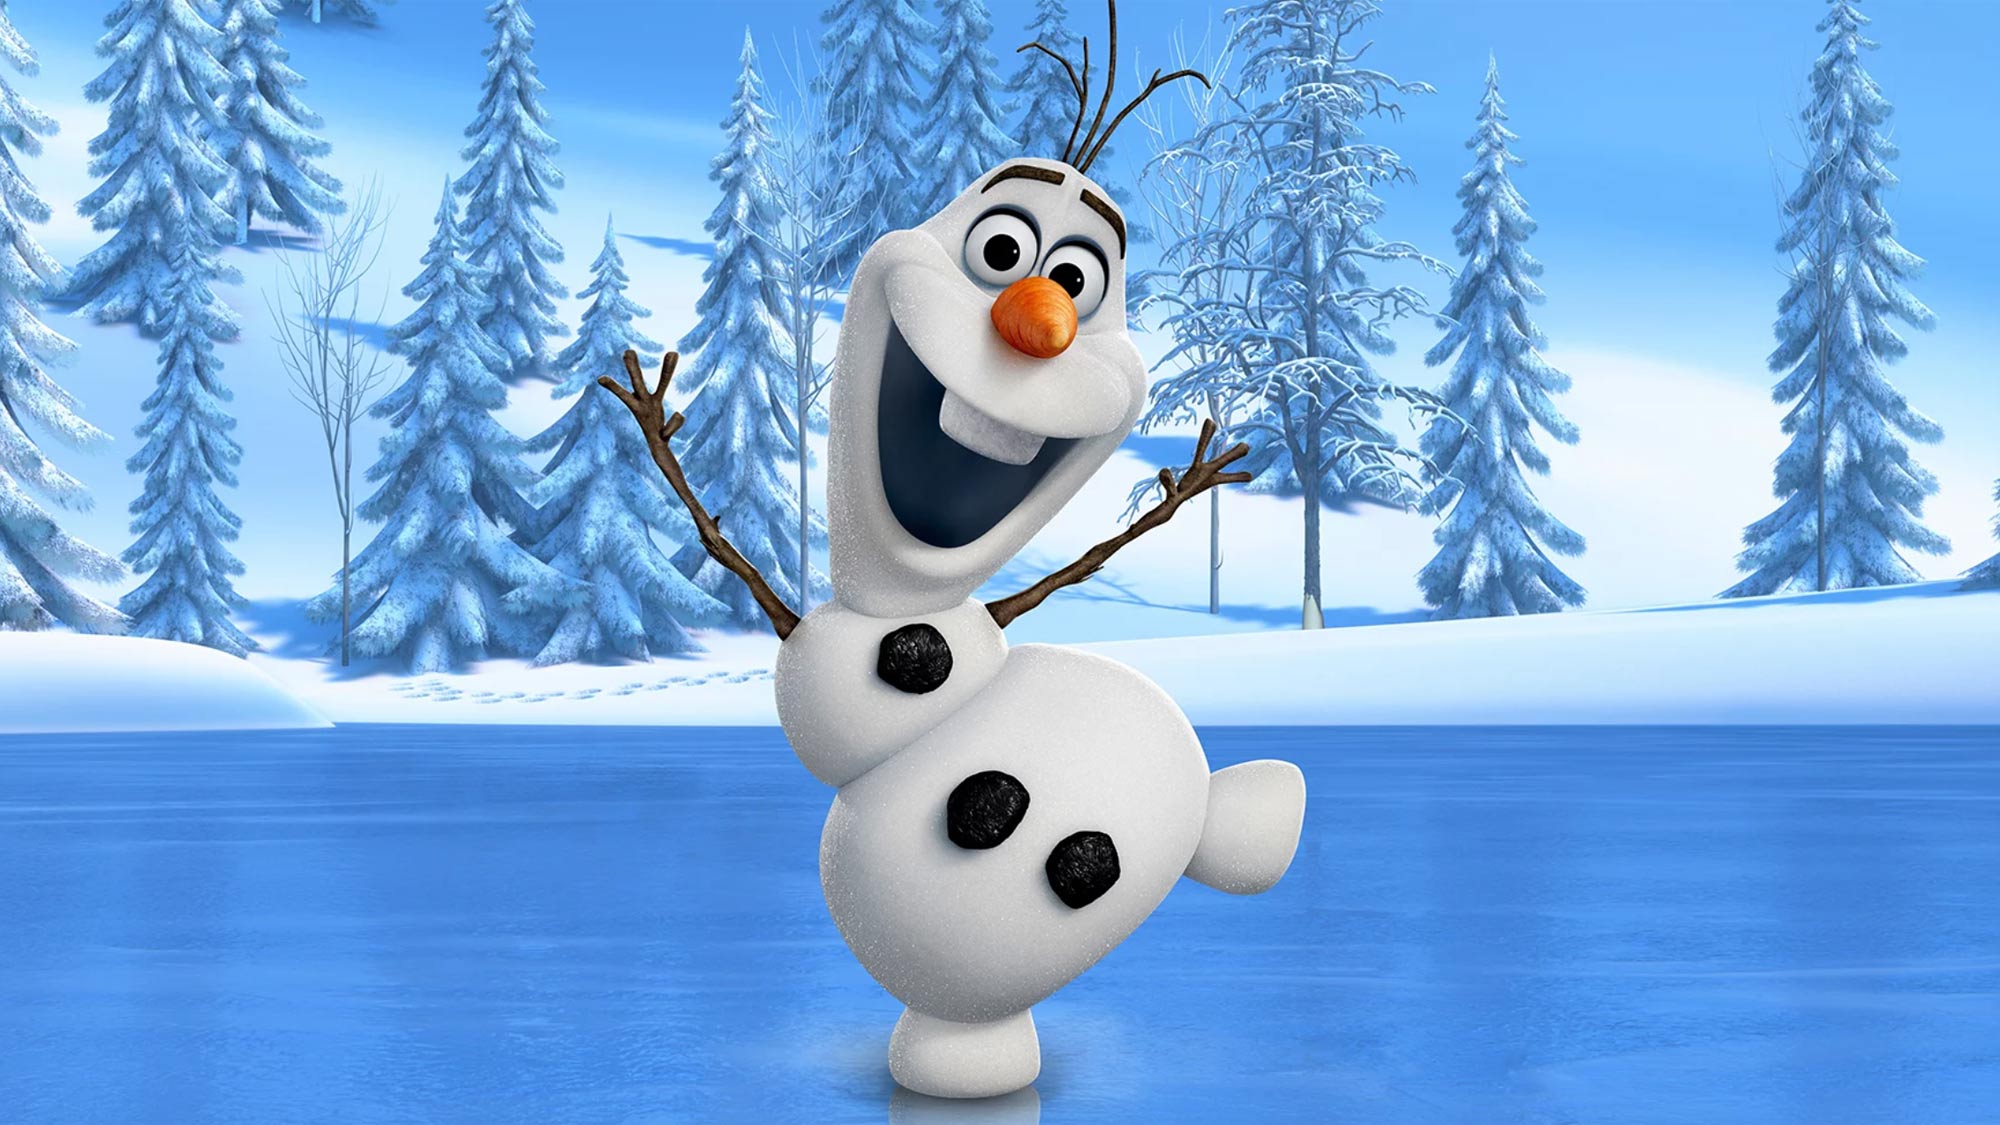 How To Watch Olaf Movie Once Upon A Snowman On Disney Plus Tom S Guide